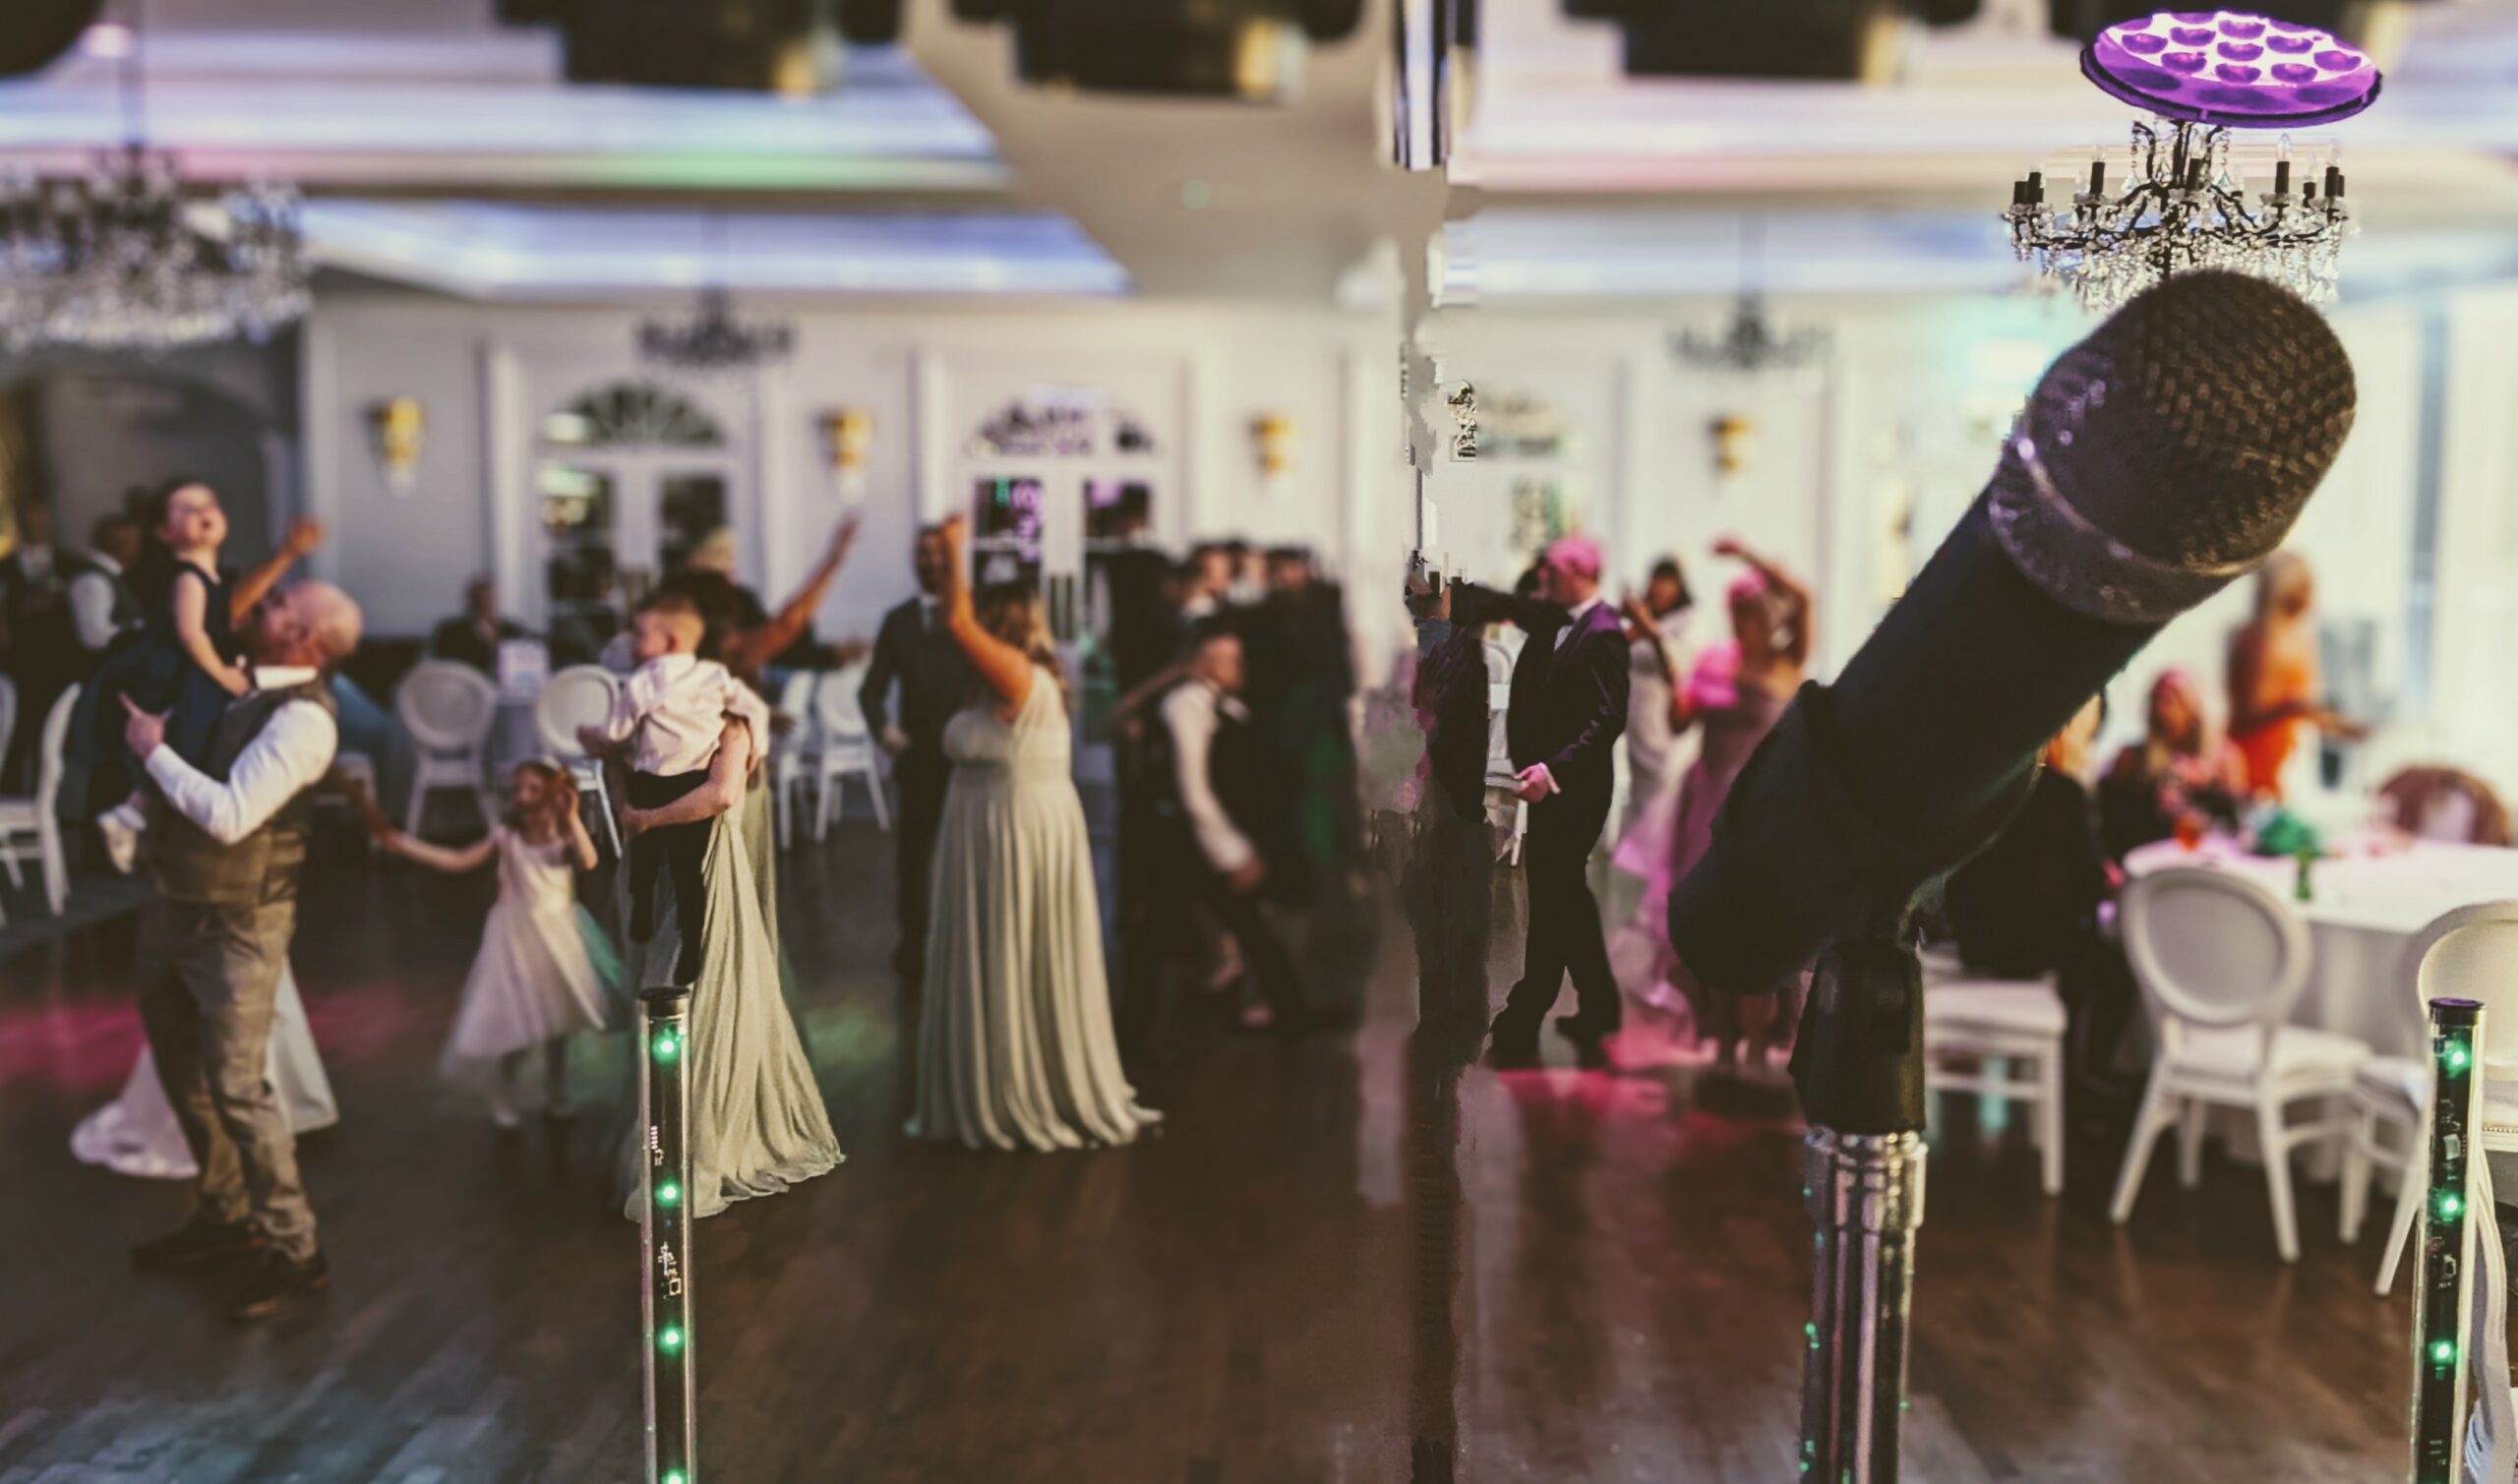 Photo of the crowd dancing at a wedding Juice Wedding Band Northern Ireland were playing at